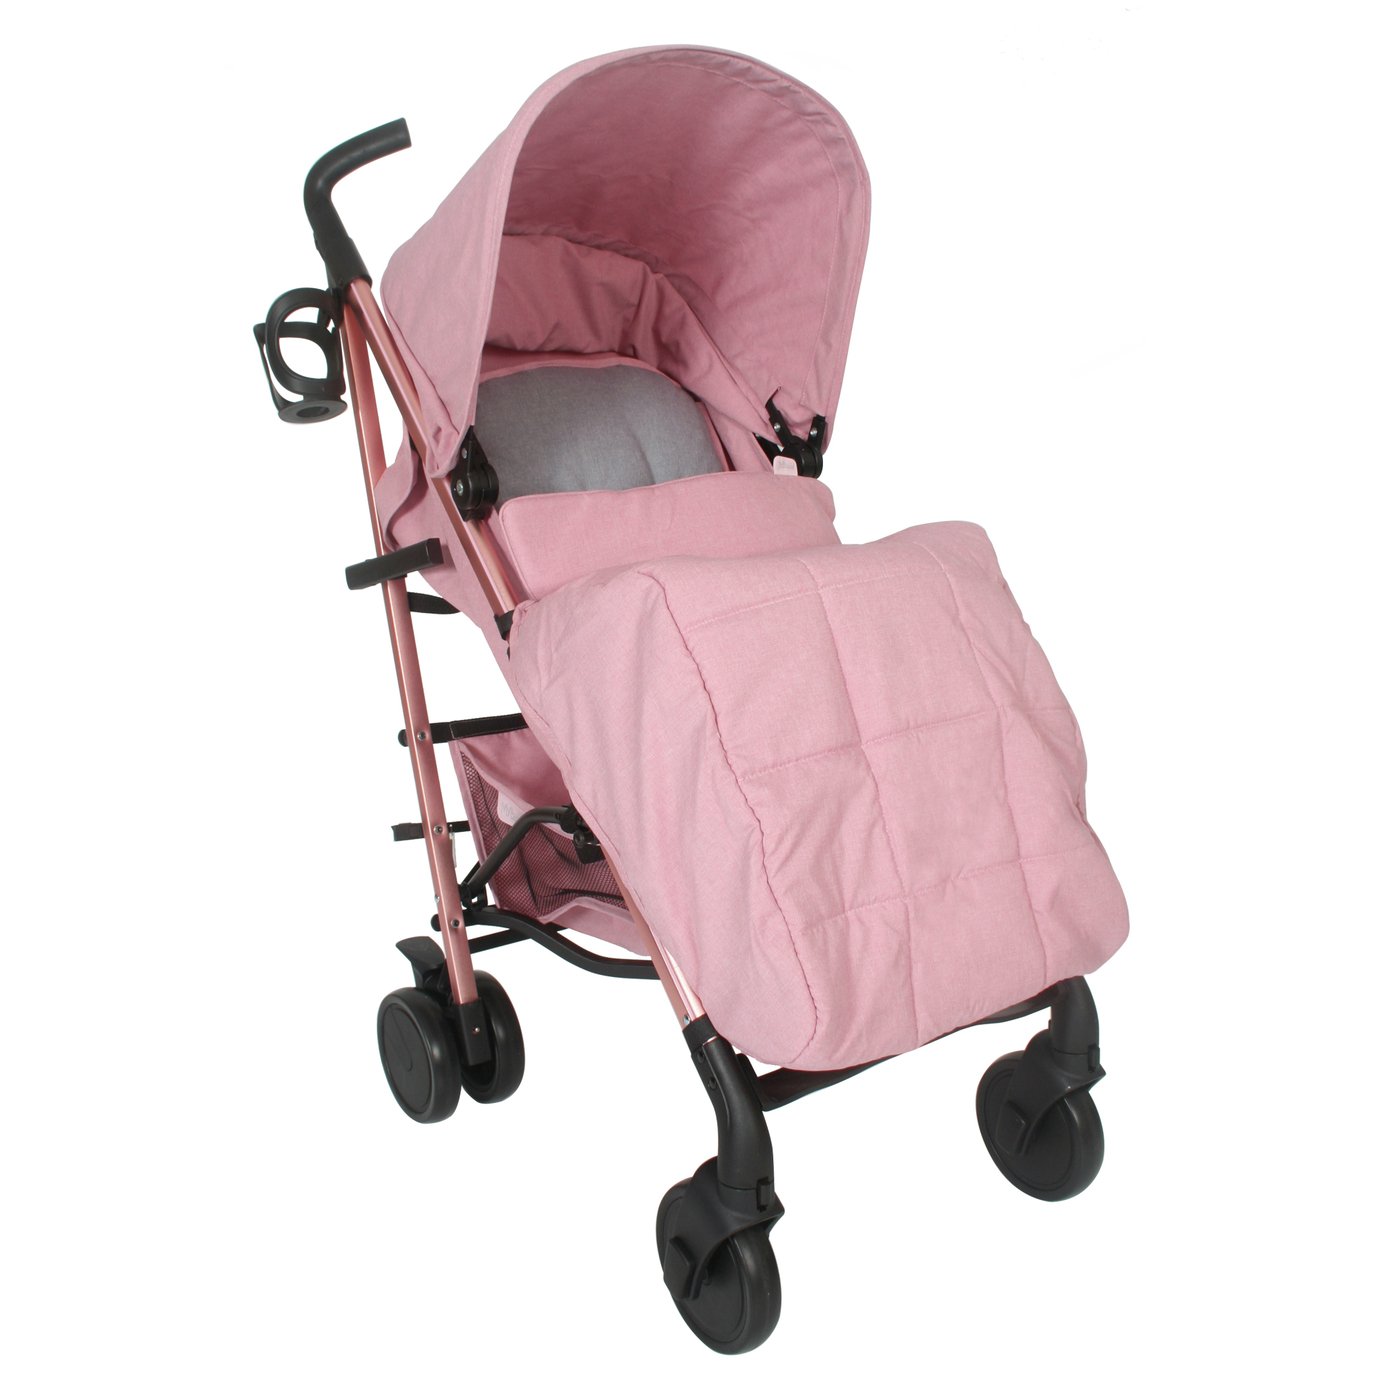 My Babiie Katie Piper MB51 Pushchair - Rose Gold & Pink